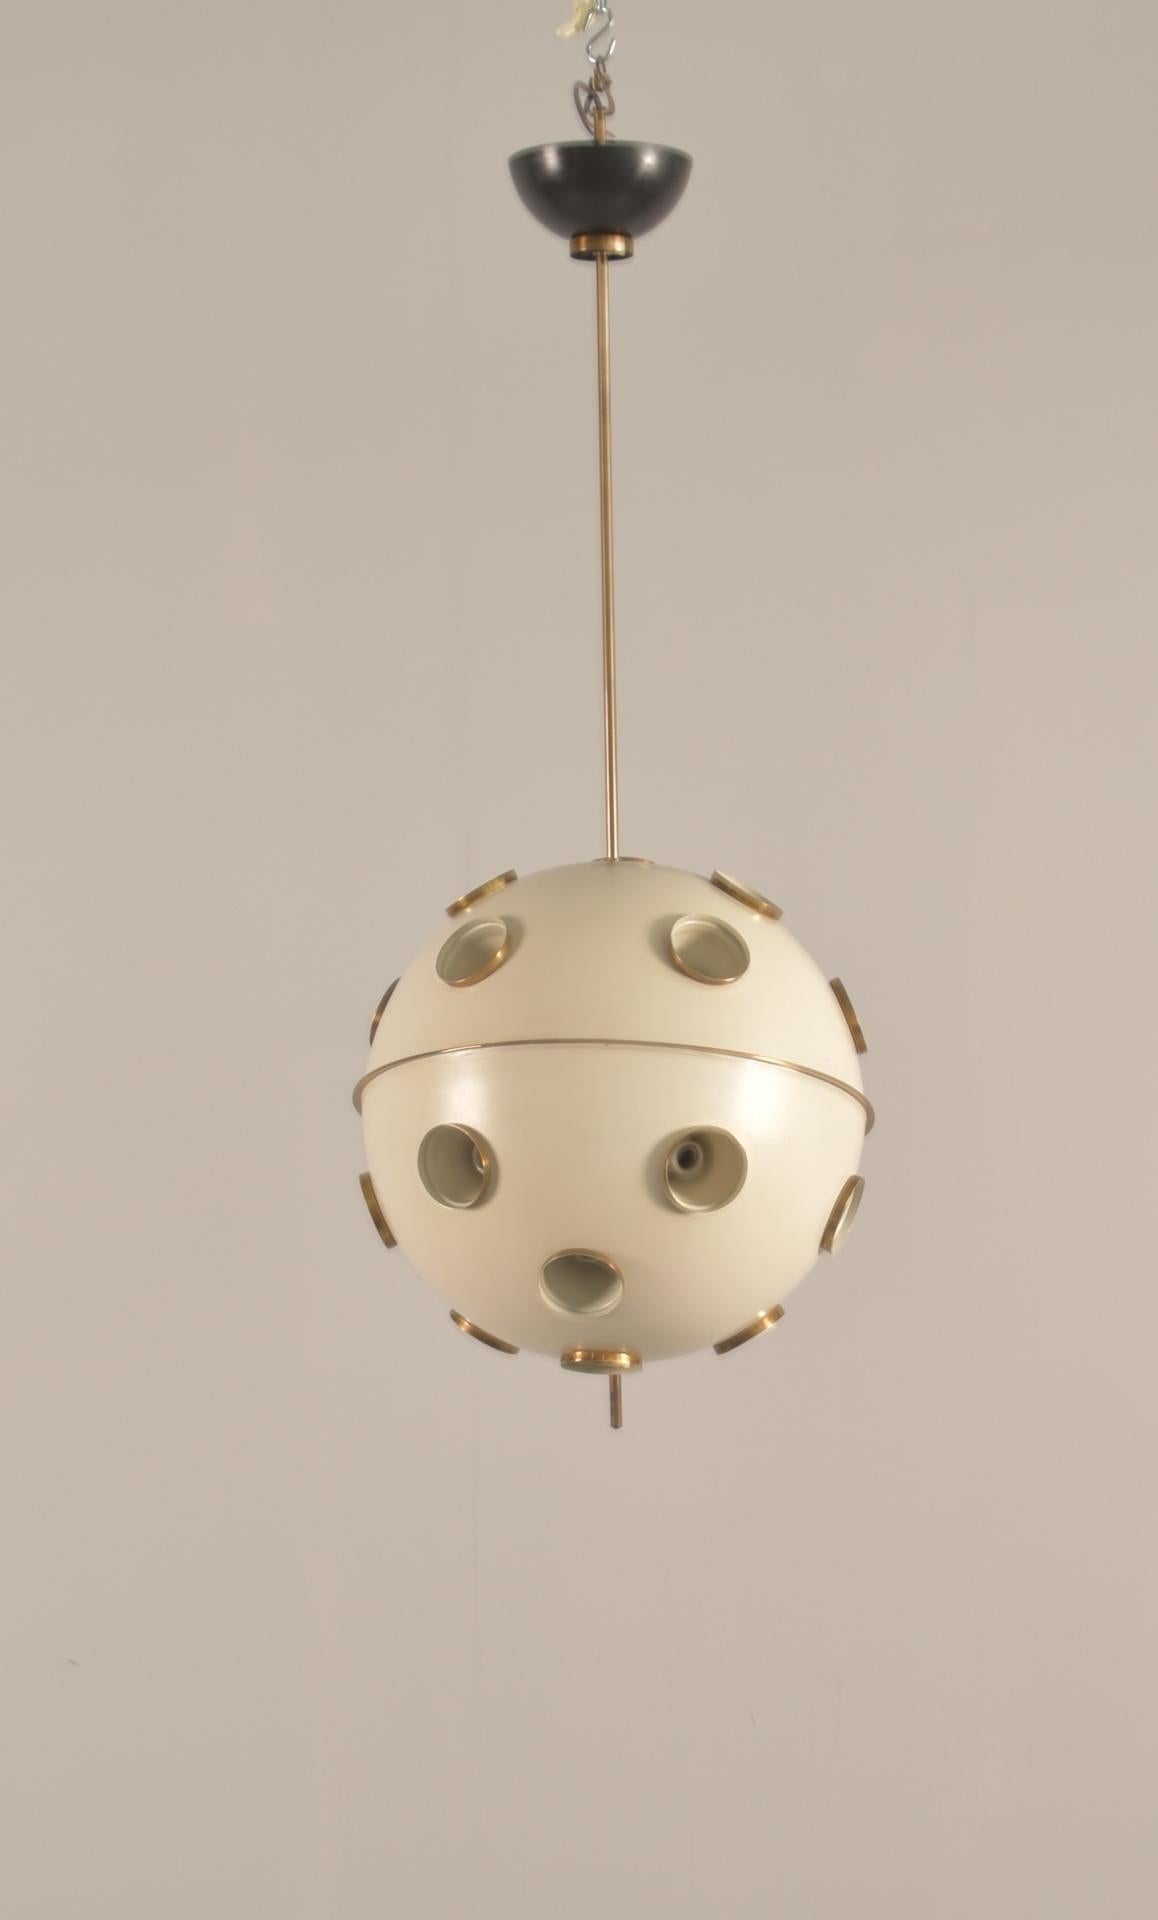 Large model 551 chandelier by Oscar Torlasco for Lumi. Designed and manufactured in Italy, circa 1960s. Original enameled metal, brass hardware. Original canopy.